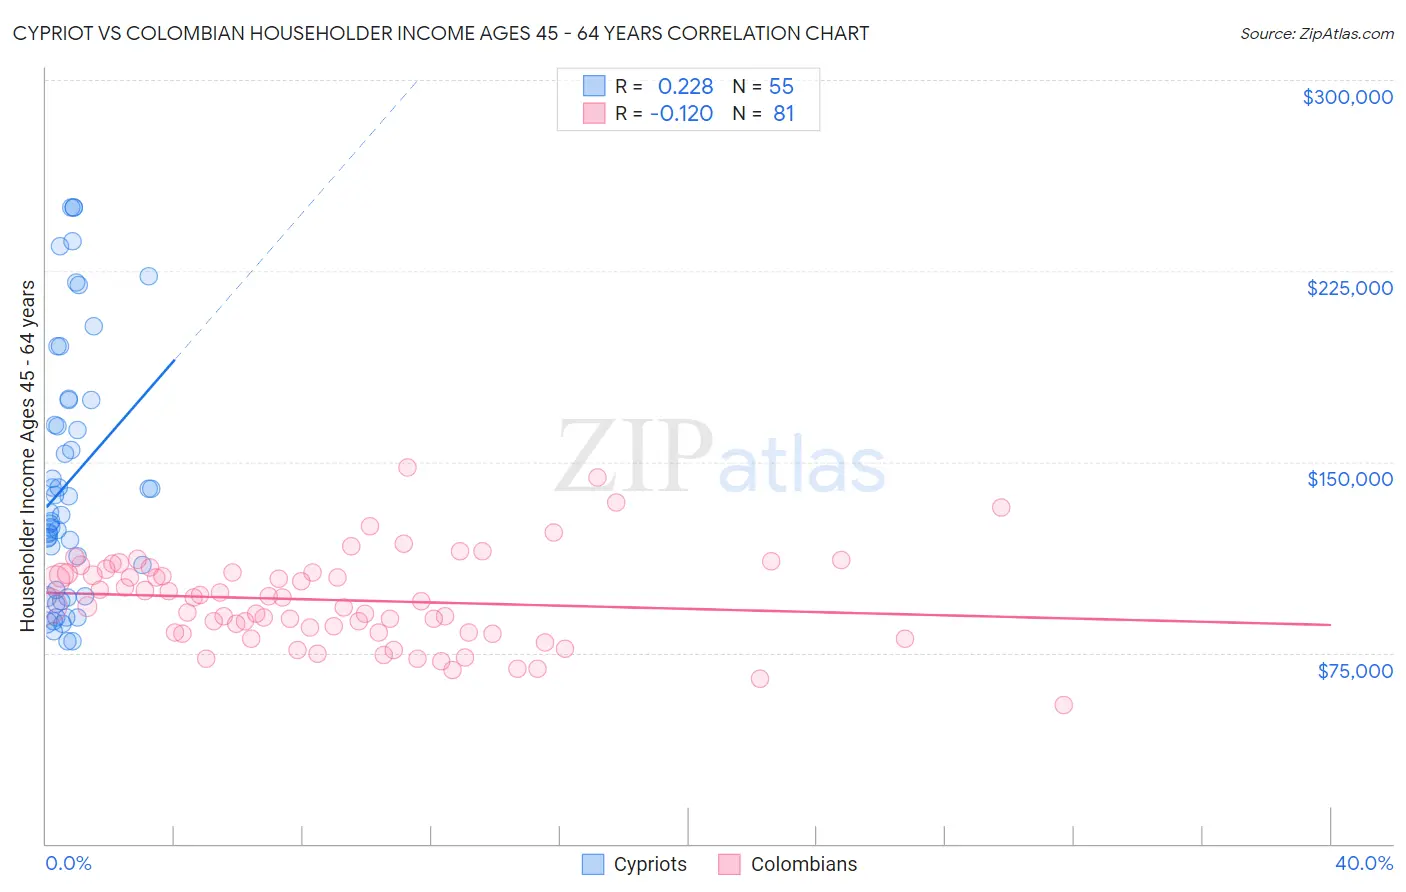 Cypriot vs Colombian Householder Income Ages 45 - 64 years